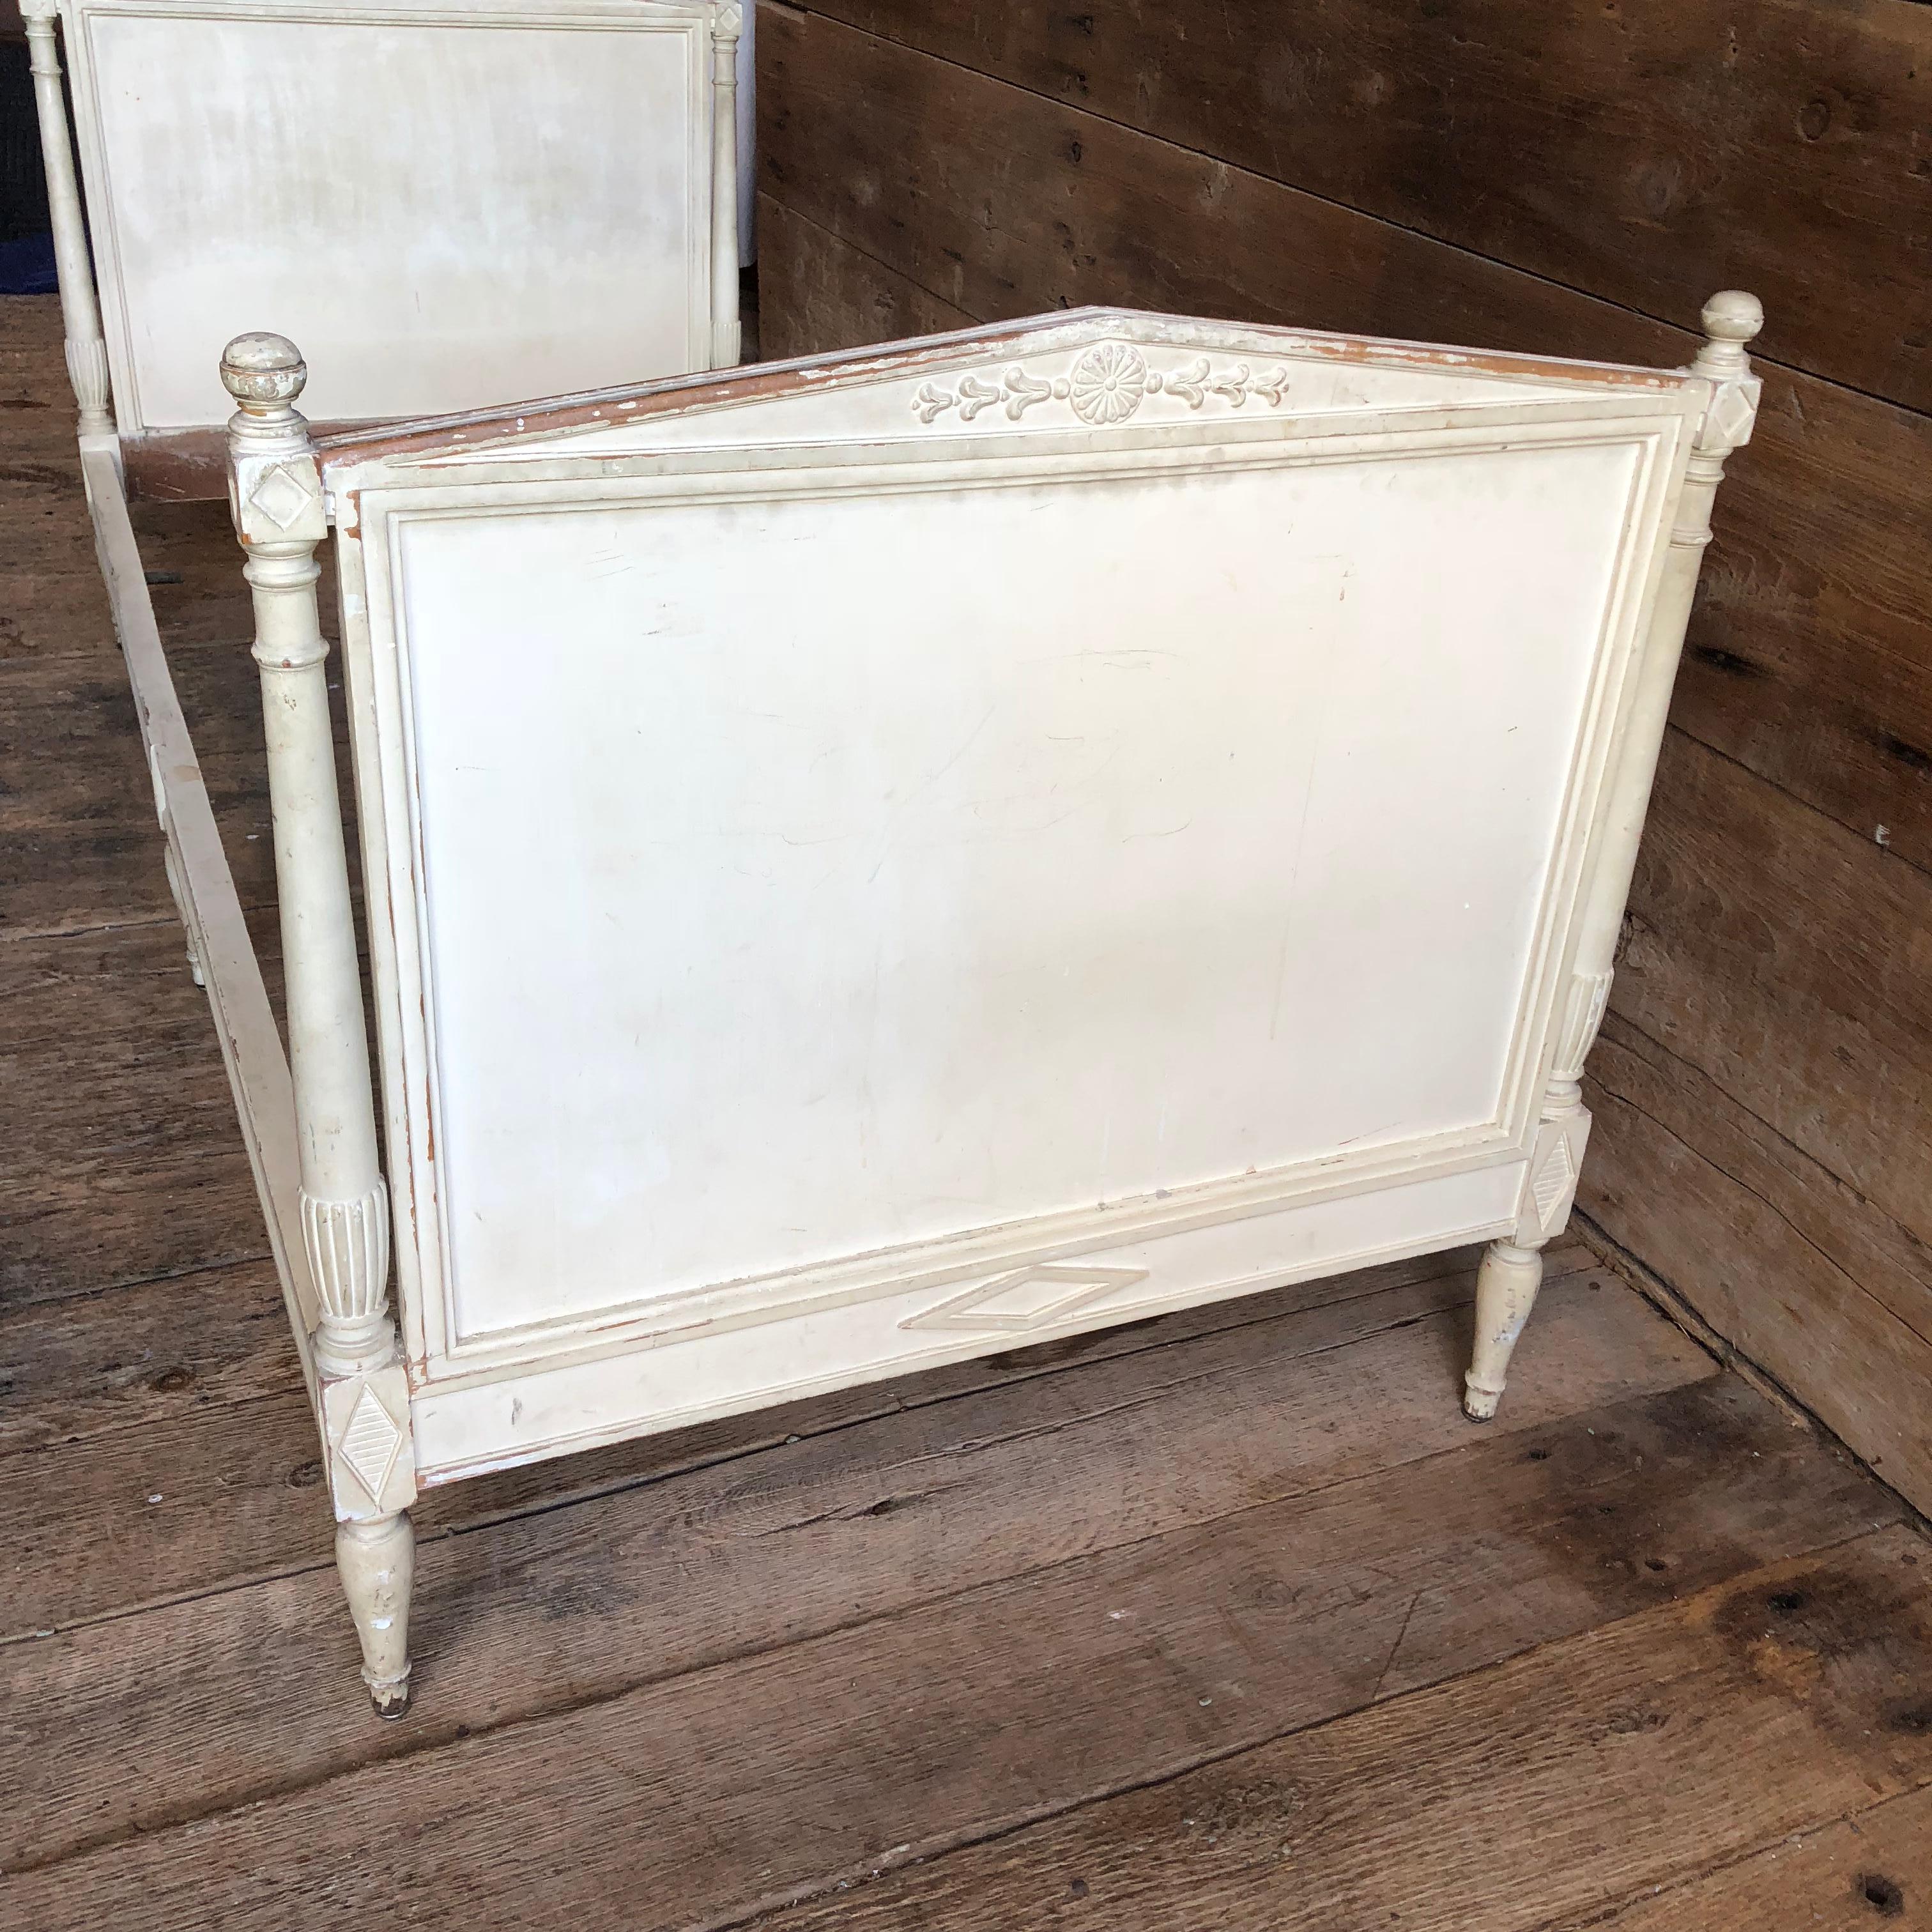 A French 19th century Directoire style painted daybed in a nice petite size, old cream painted finish with patina, the diamond crested headband footboards with turned ball finials and central carved rosettes, turned columns, on urn form feet, the